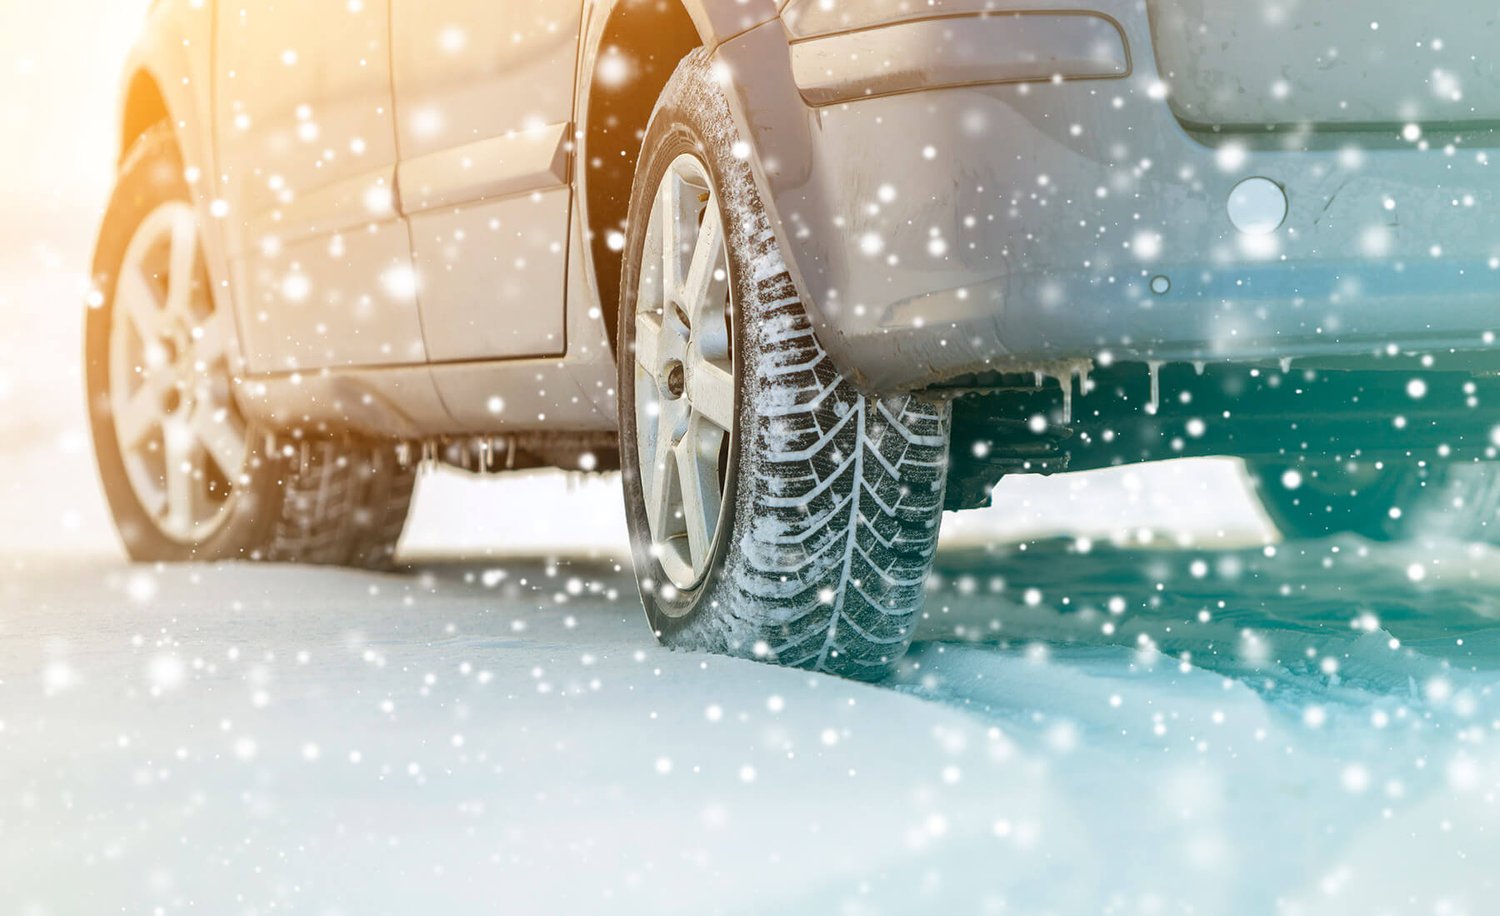 Winter Emergency Car Kit and Tips – Lia Auto Group Blog